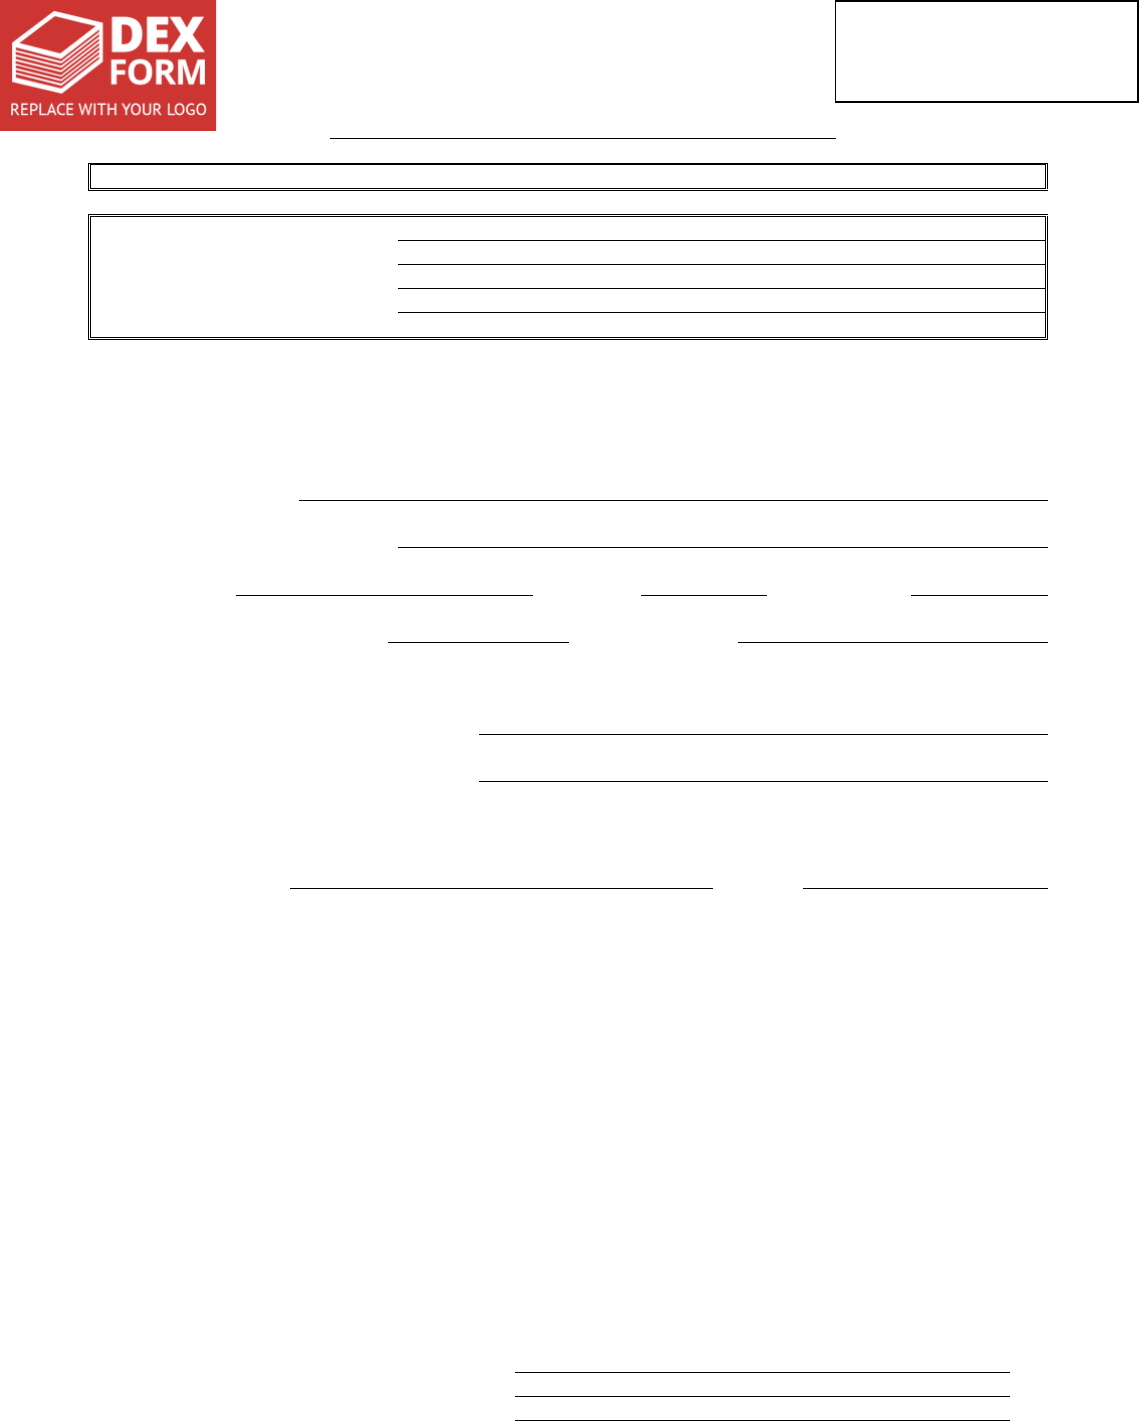 Electronic funds transfer authorization form in Word and Pdf formats Intended For Electronic Funds Transfer Deposit Form Template With Regard To Electronic Funds Transfer Deposit Form Template